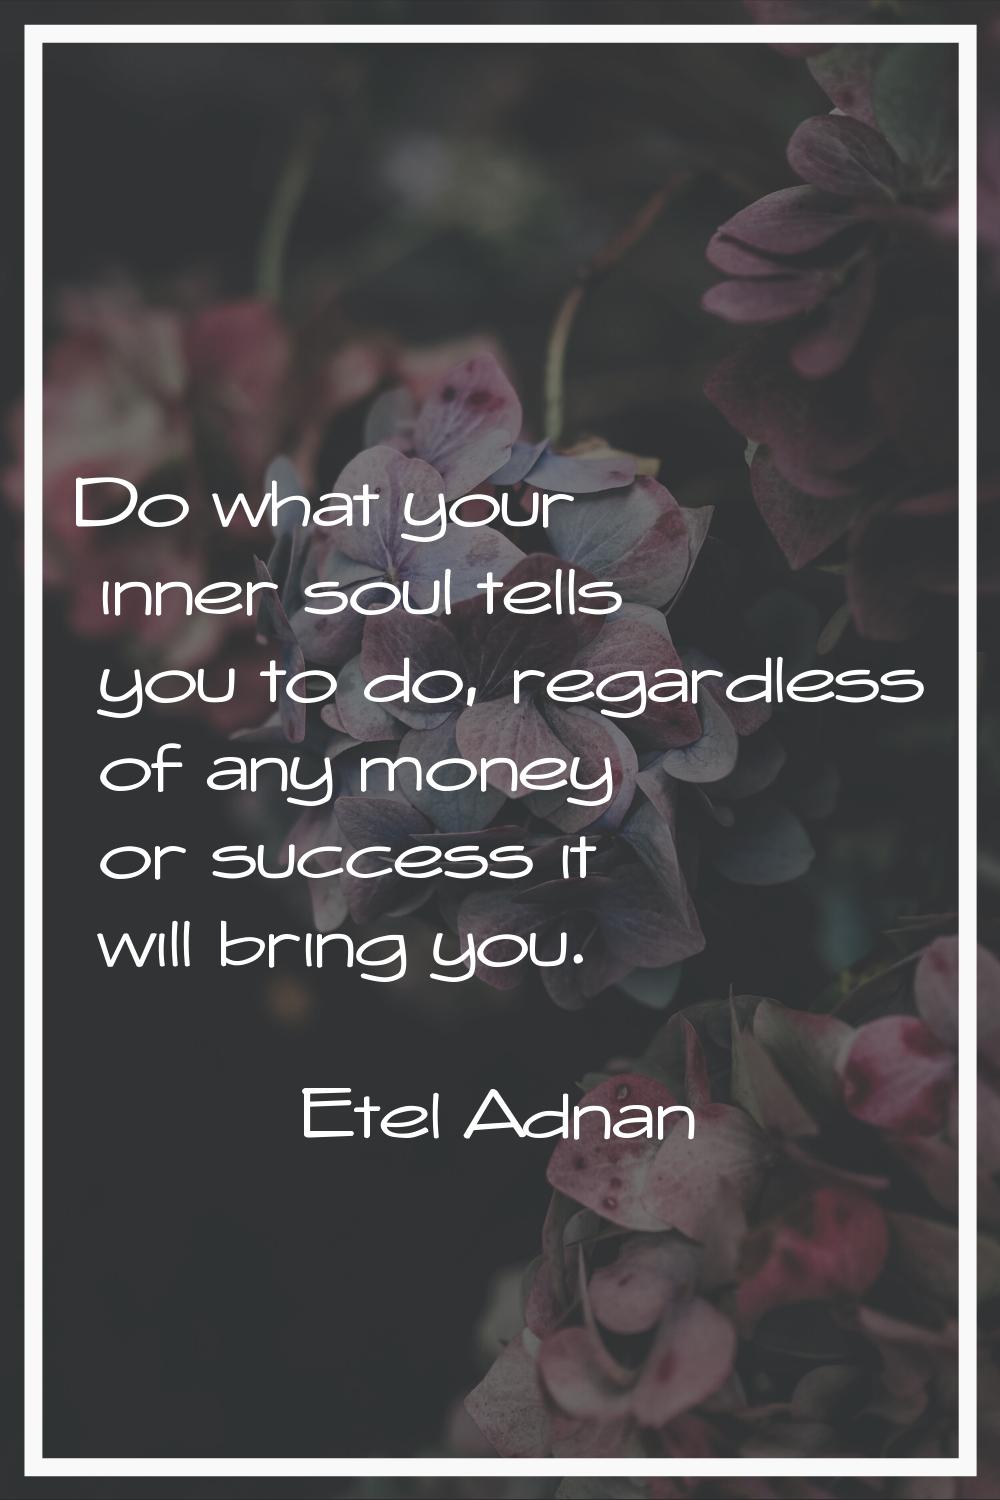 Do what your inner soul tells you to do, regardless of any money or success it will bring you.